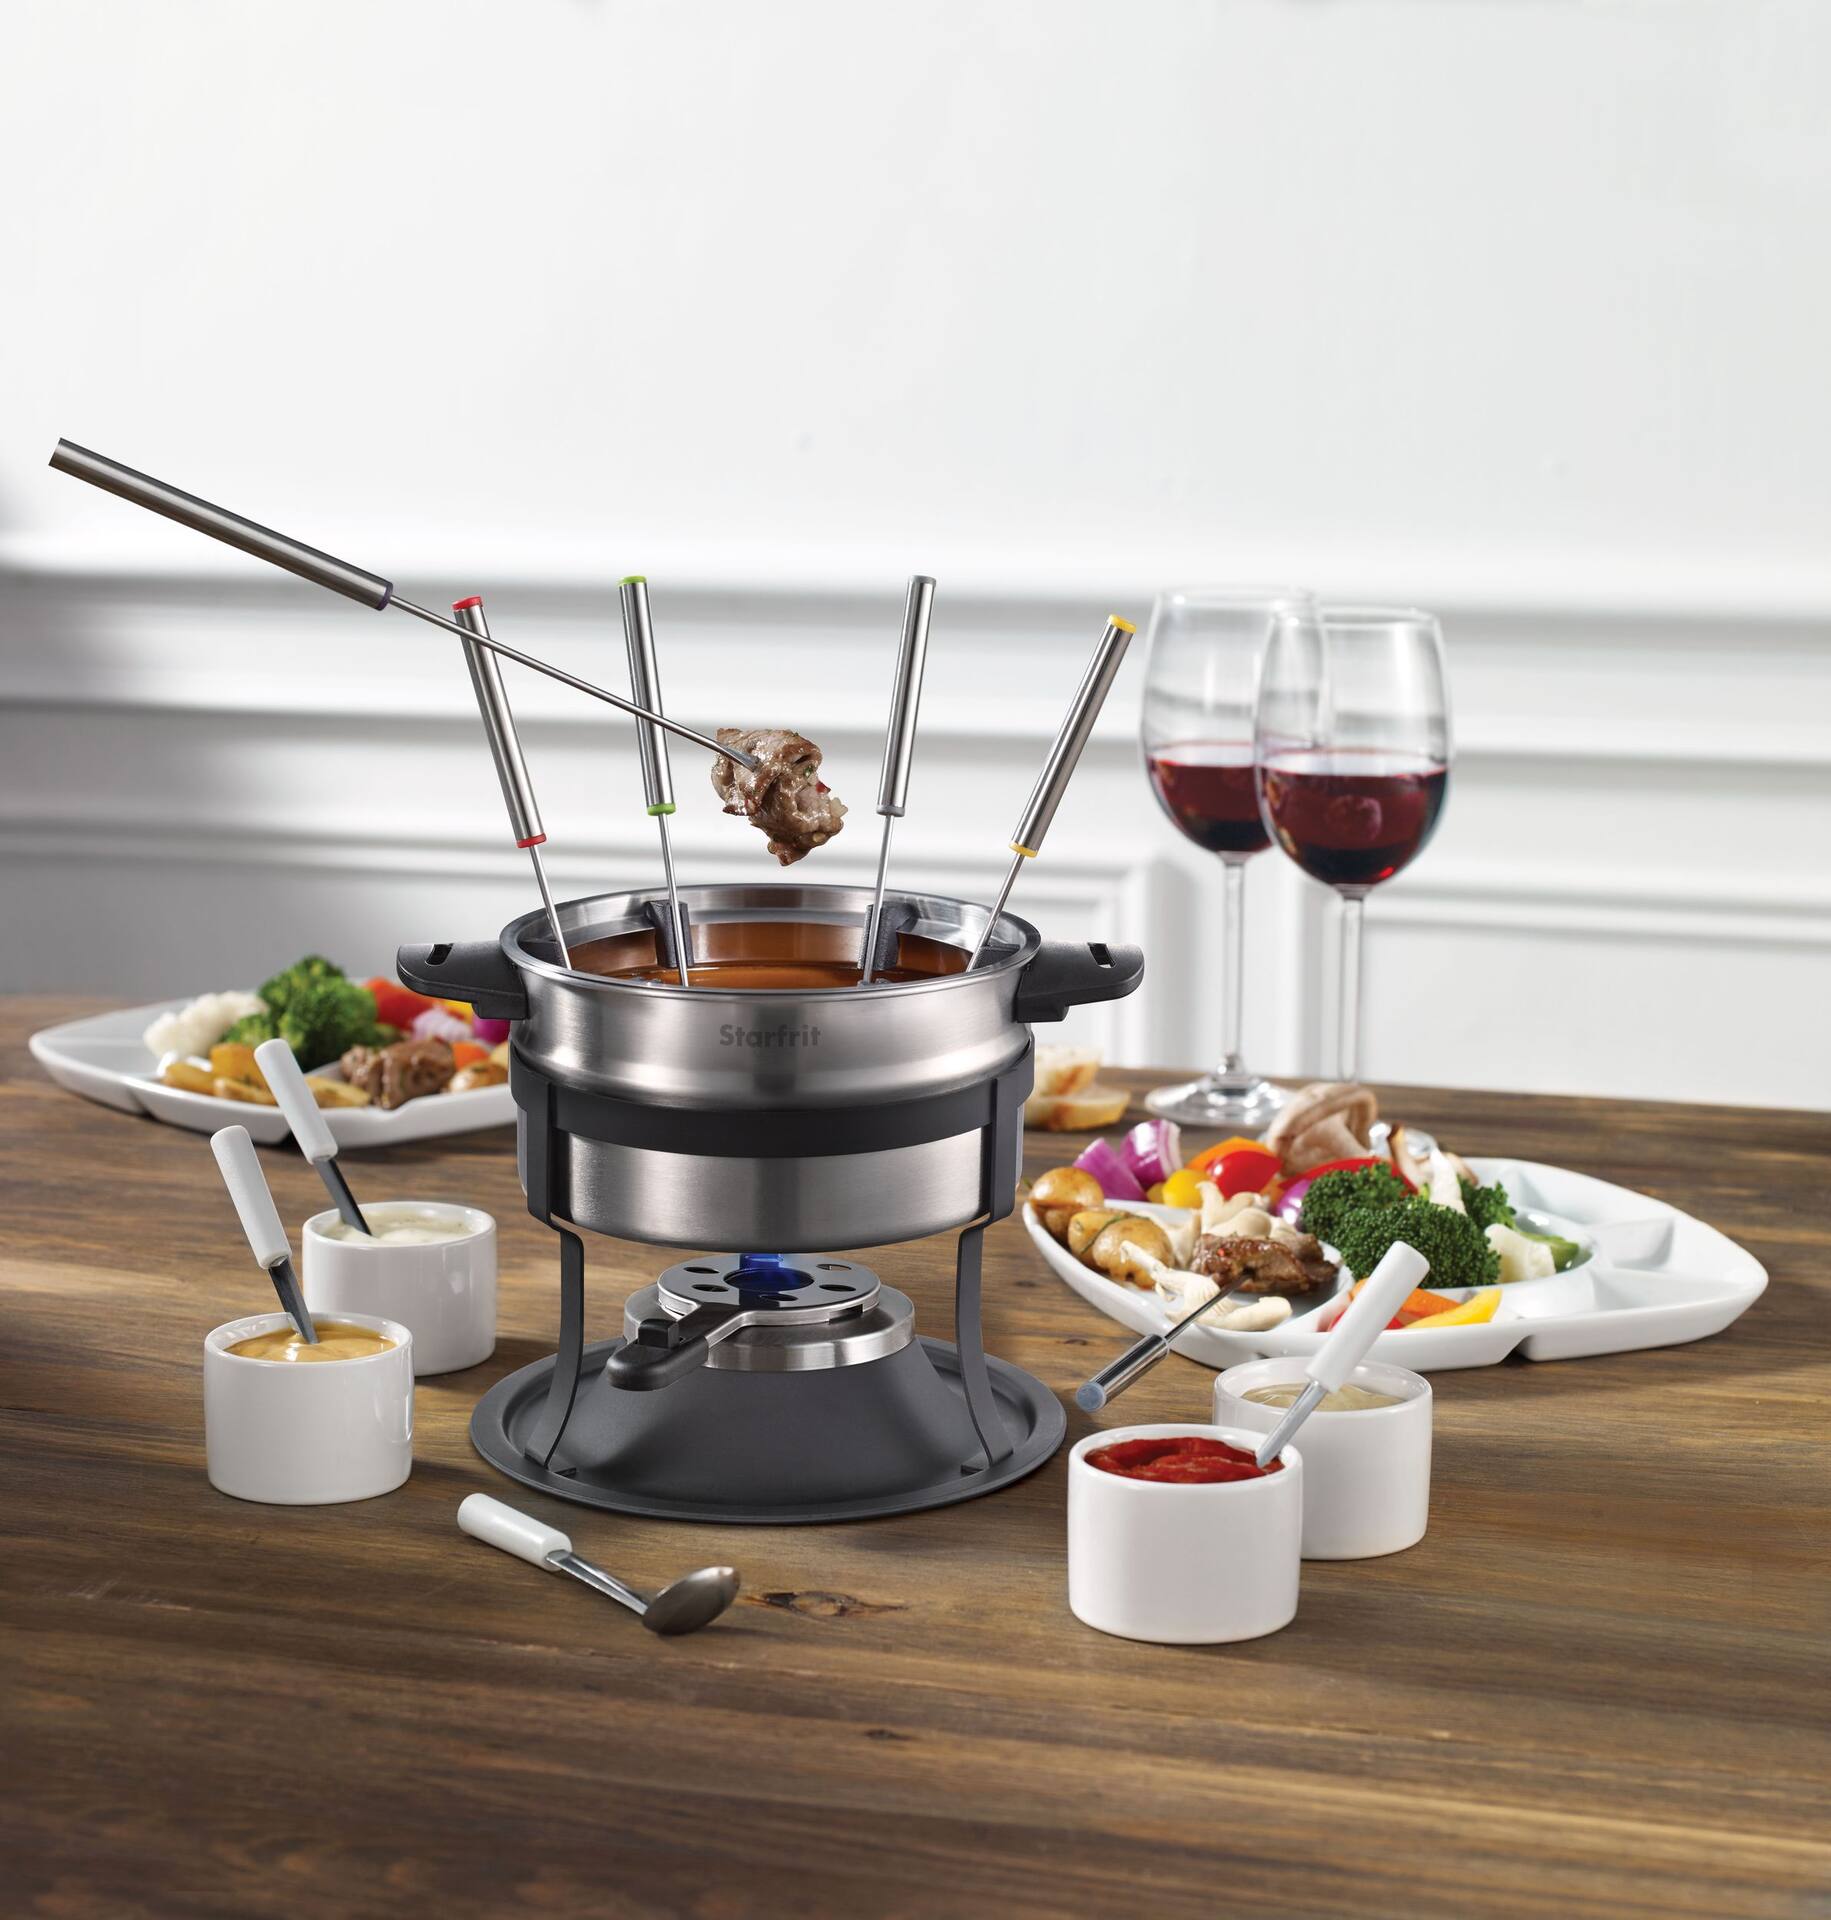 Heritage 3-in-1 Stainless Steel Fondue Set w/ 6 Forks, 1.6L, 19-pc